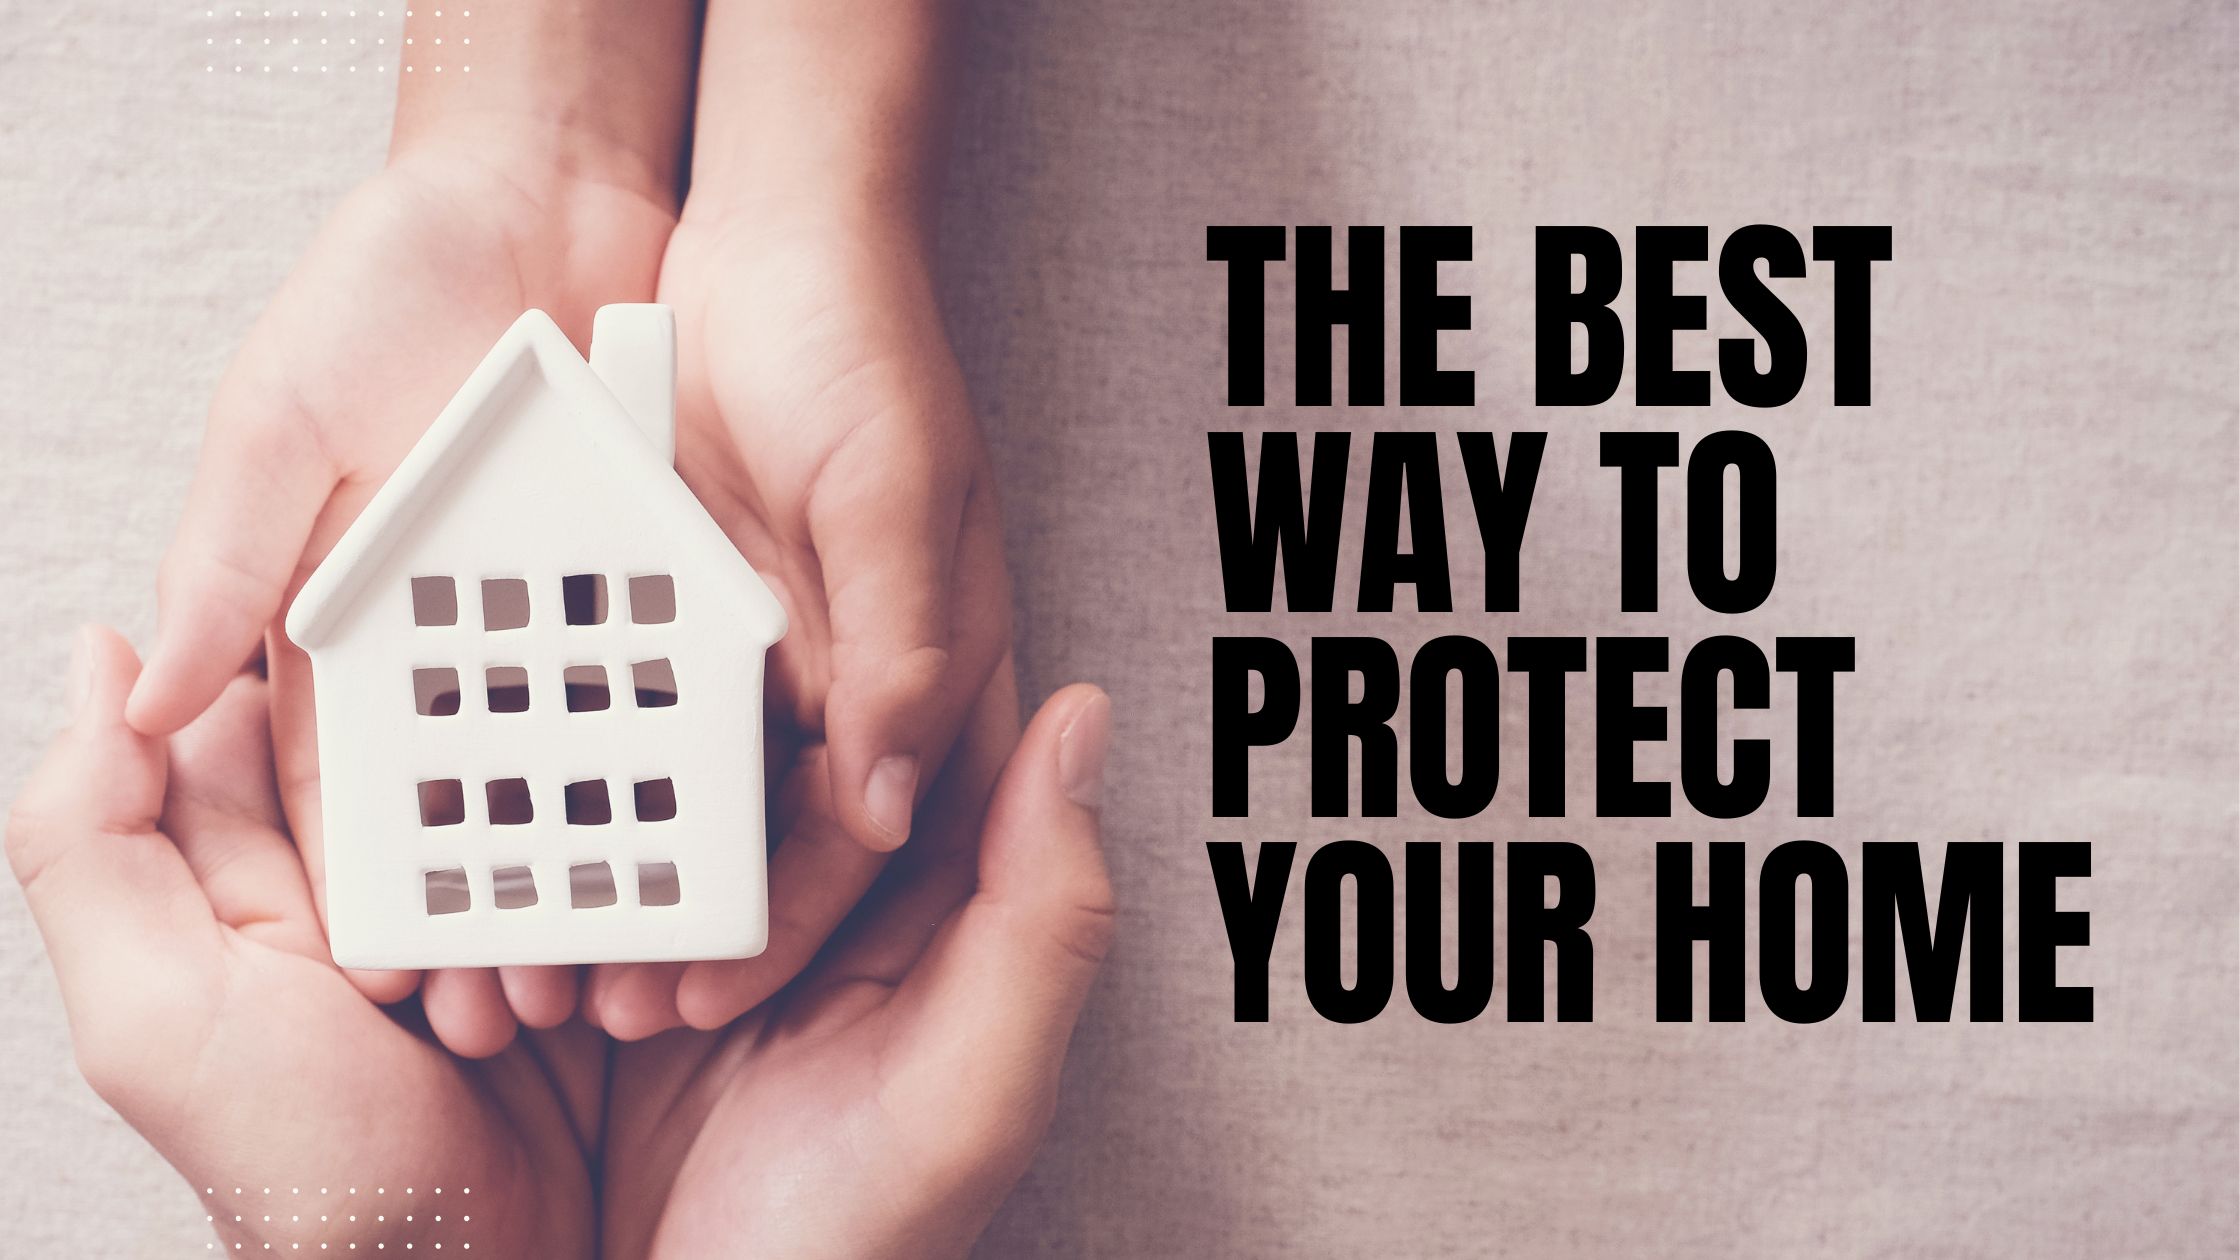 The Best Way to Protect Your Home